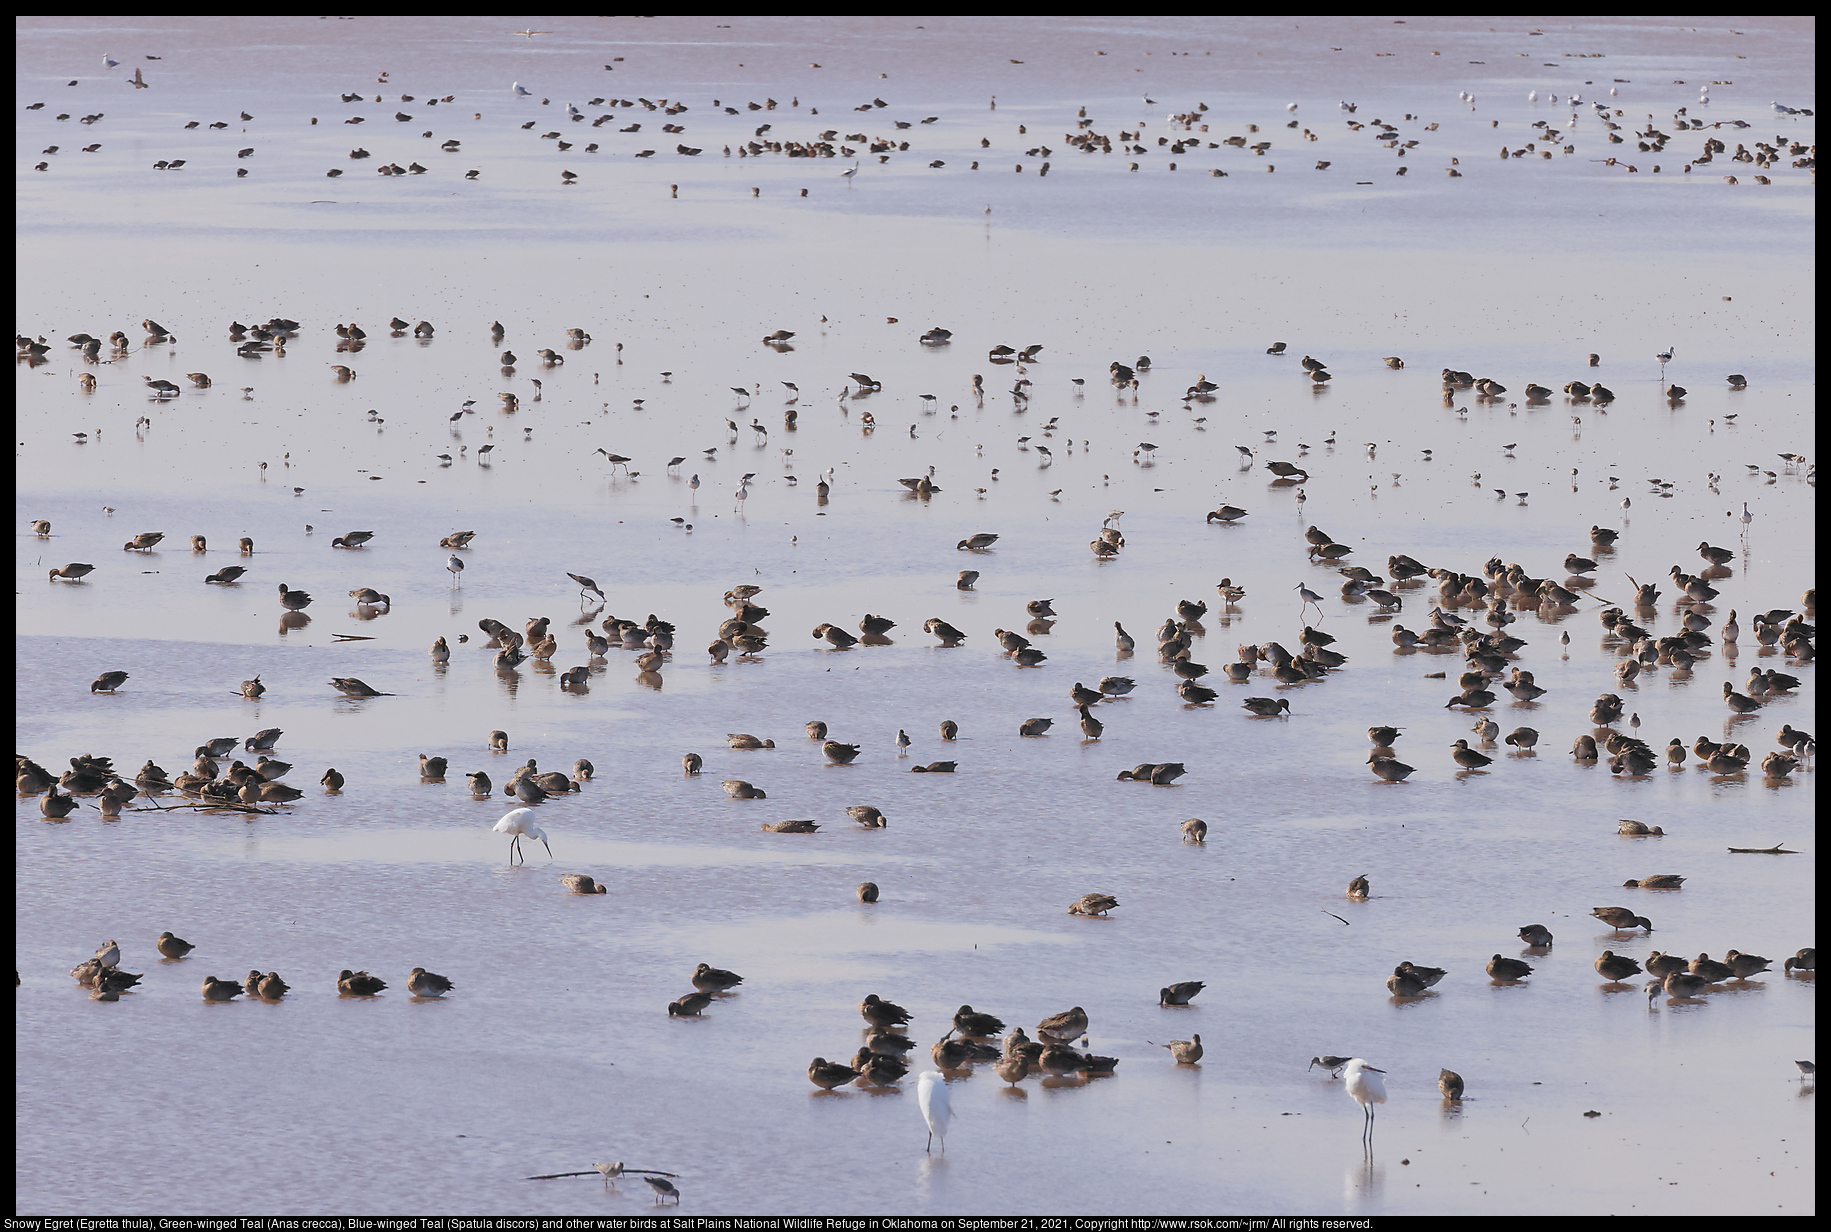 Snowy Egret (Egretta thula), Green-winged Teal (Anas crecca), Blue-winged Teal (Spatula discors) and other water birds at Salt Plains National Wildlife Refuge in Oklahoma on September 21, 2021